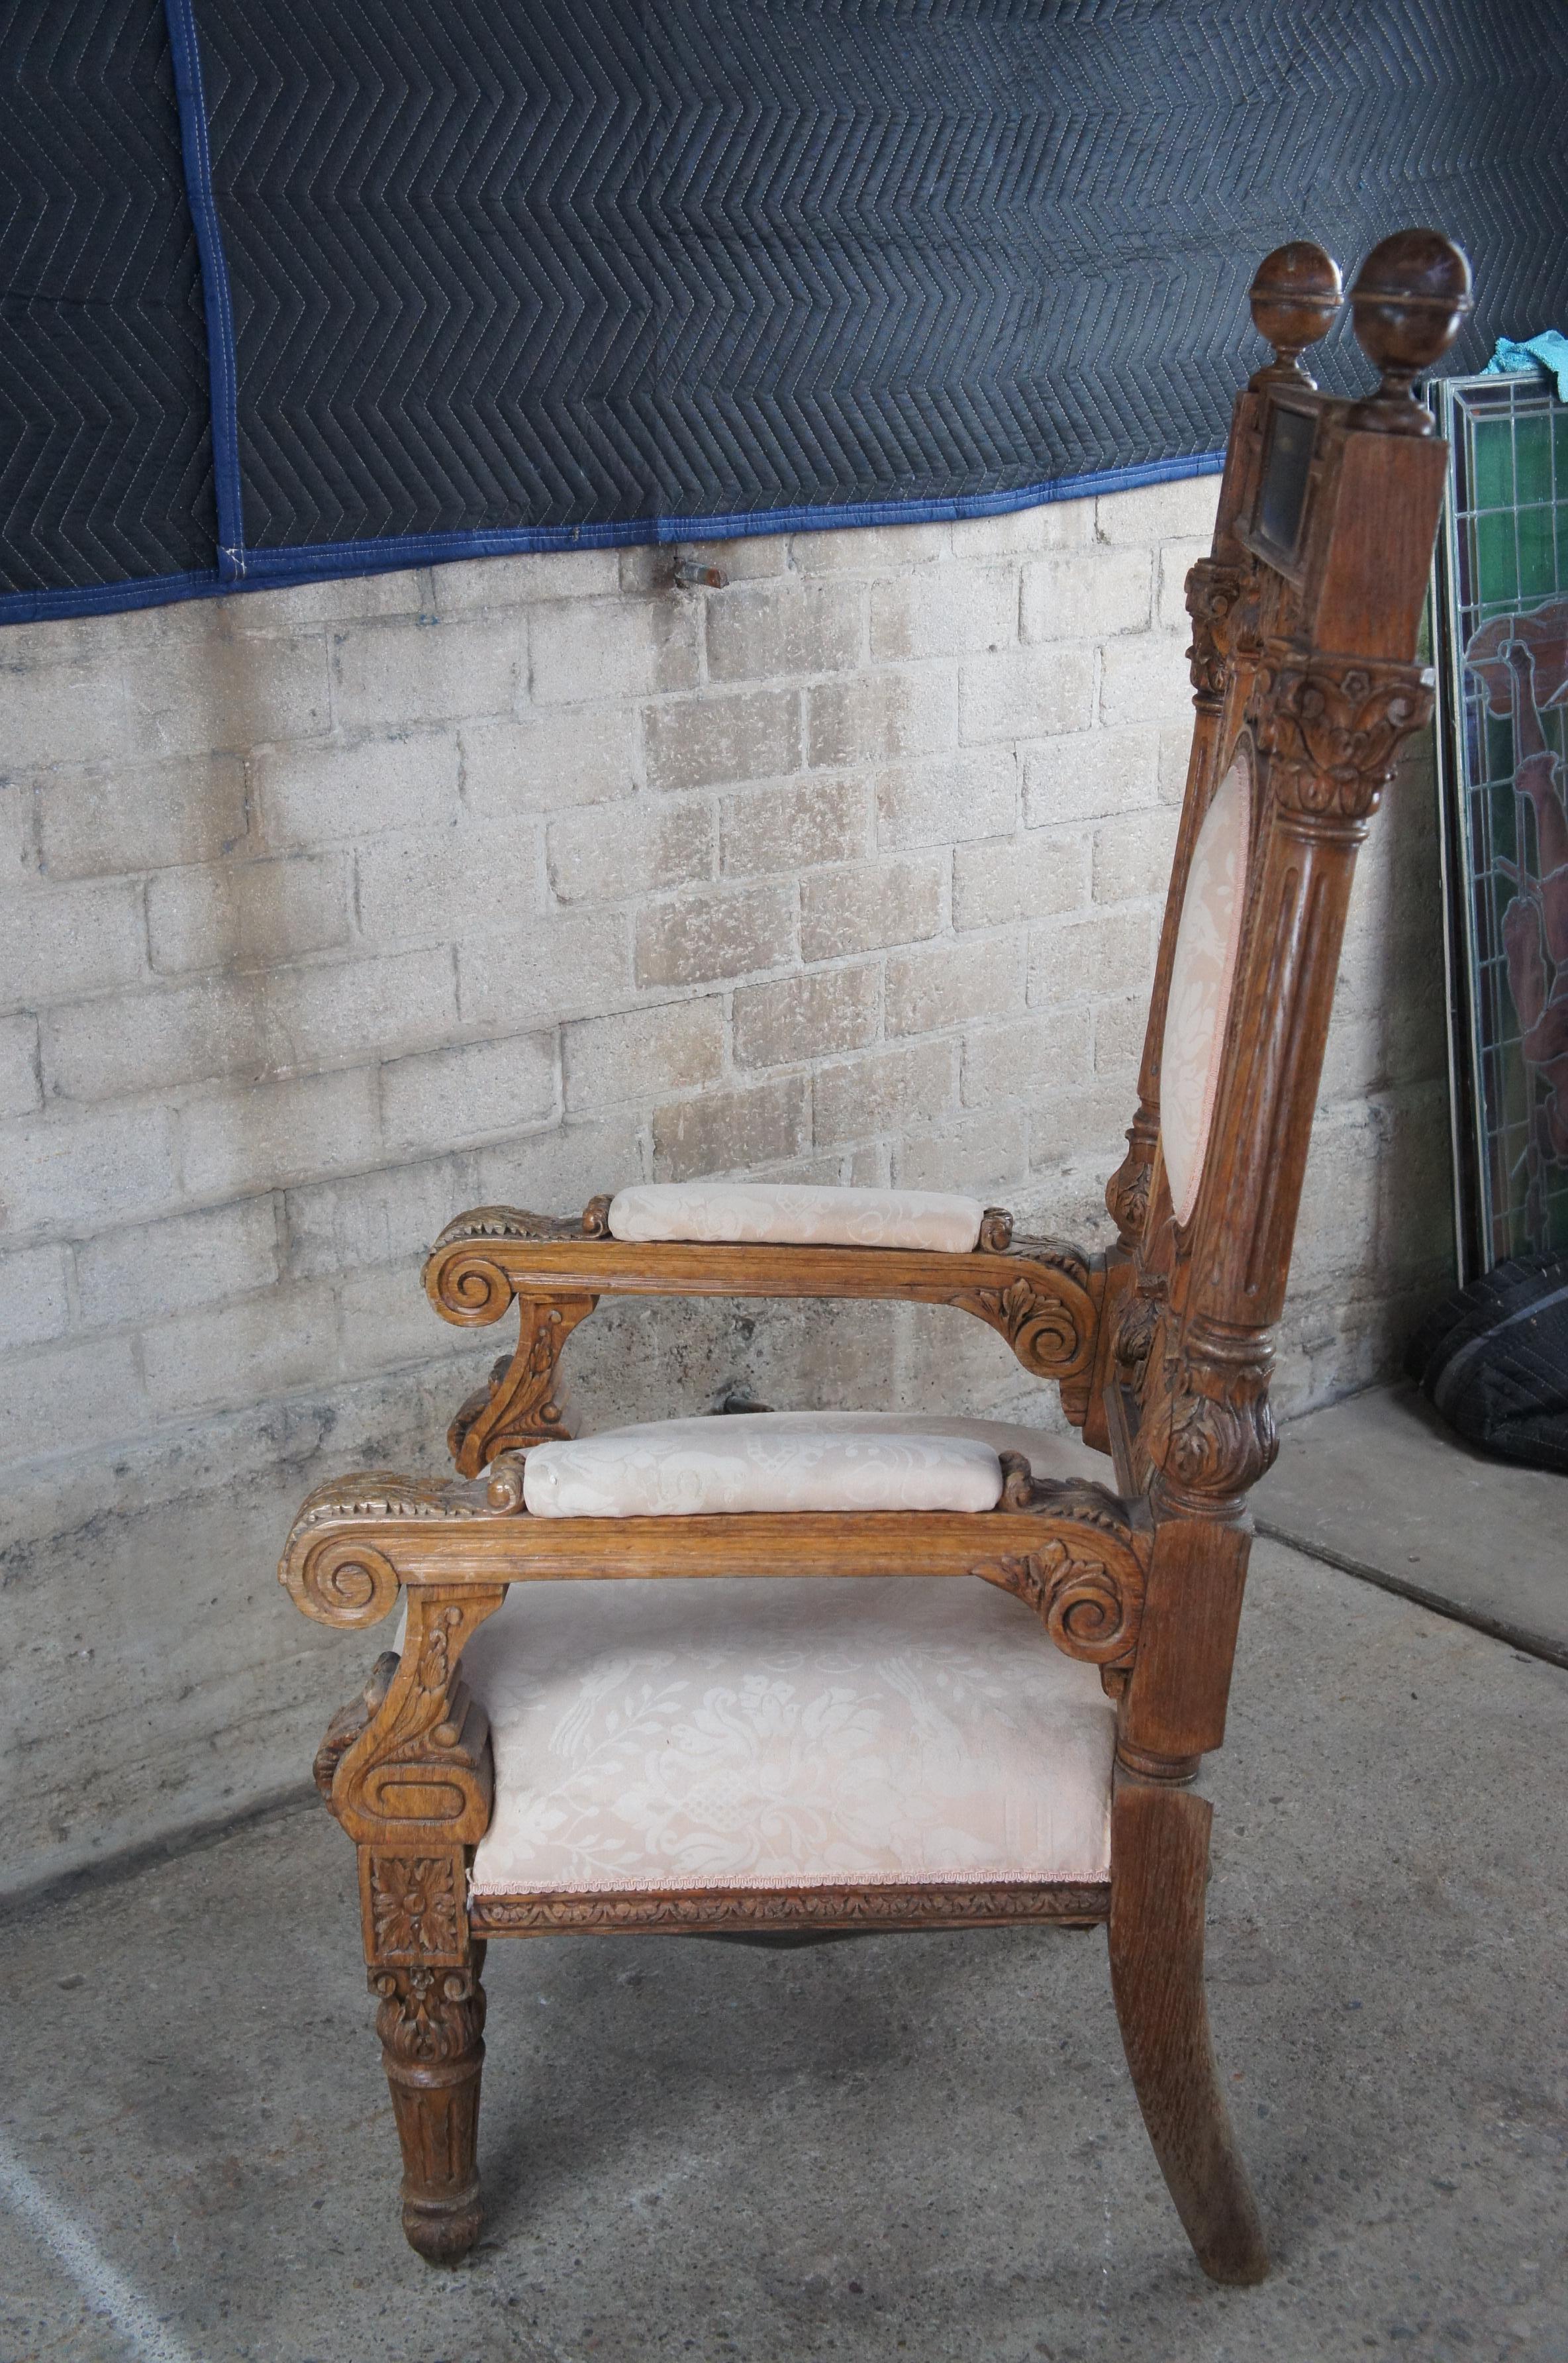 Monumental Antique Victorian Ornate Carved Oak Throne Arm Chair 58